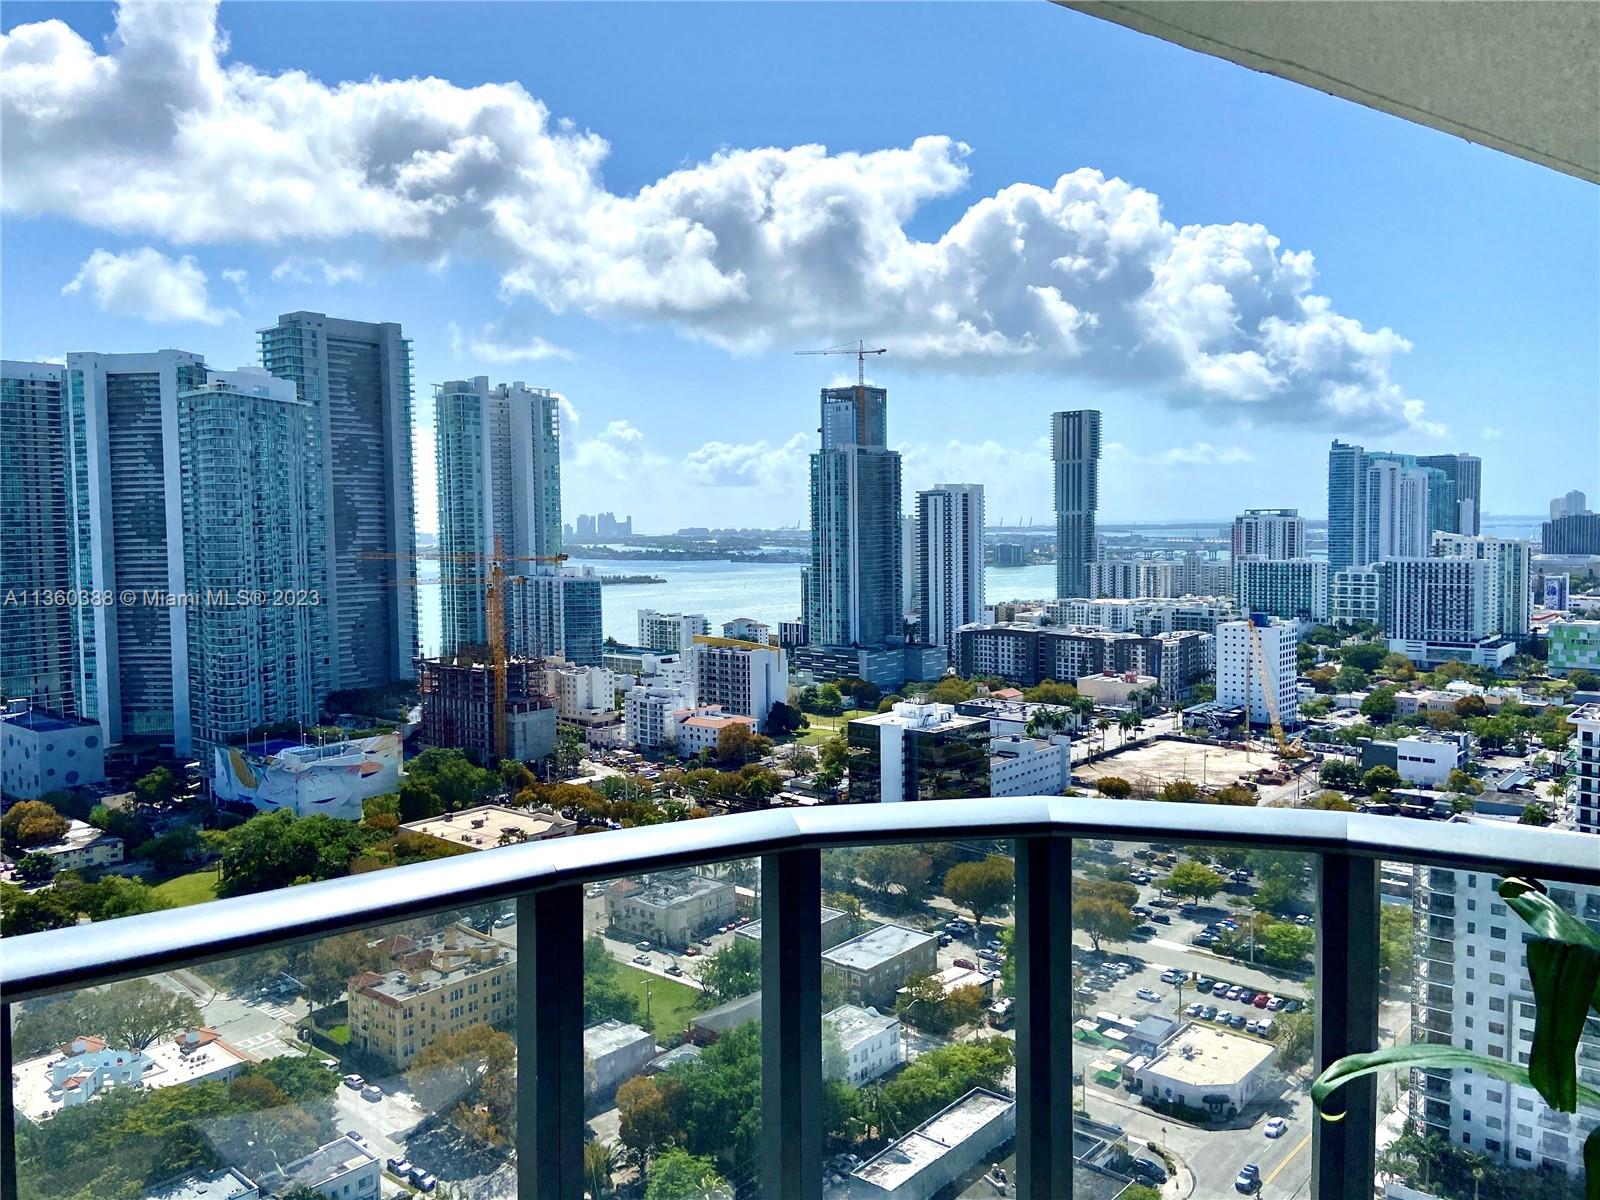 DIRECT WATER VIEWS of Biscayne Bay from this 31st Floor 1 bedroom +Den/Two Bathroom Residence at Hyde Midtown. Features include porcelain floors throughout, open concept kitchen and a large terrace. Can be Sold Furnished or Unfurnished. In Unit Washer/Dryer. Hyde Midtown is a luxury condo with resort style amenities including on-site spa, swimming pool, hot tub, outdoor cabanas, top of the line fitness center, tennis courts and a putting green. Five-star hotel services and amenities include: tennis court, spinning studio, movie theater, club & kids room. Walking distance from retail shops in Miami Design District and Wynwood bars and restaurants.